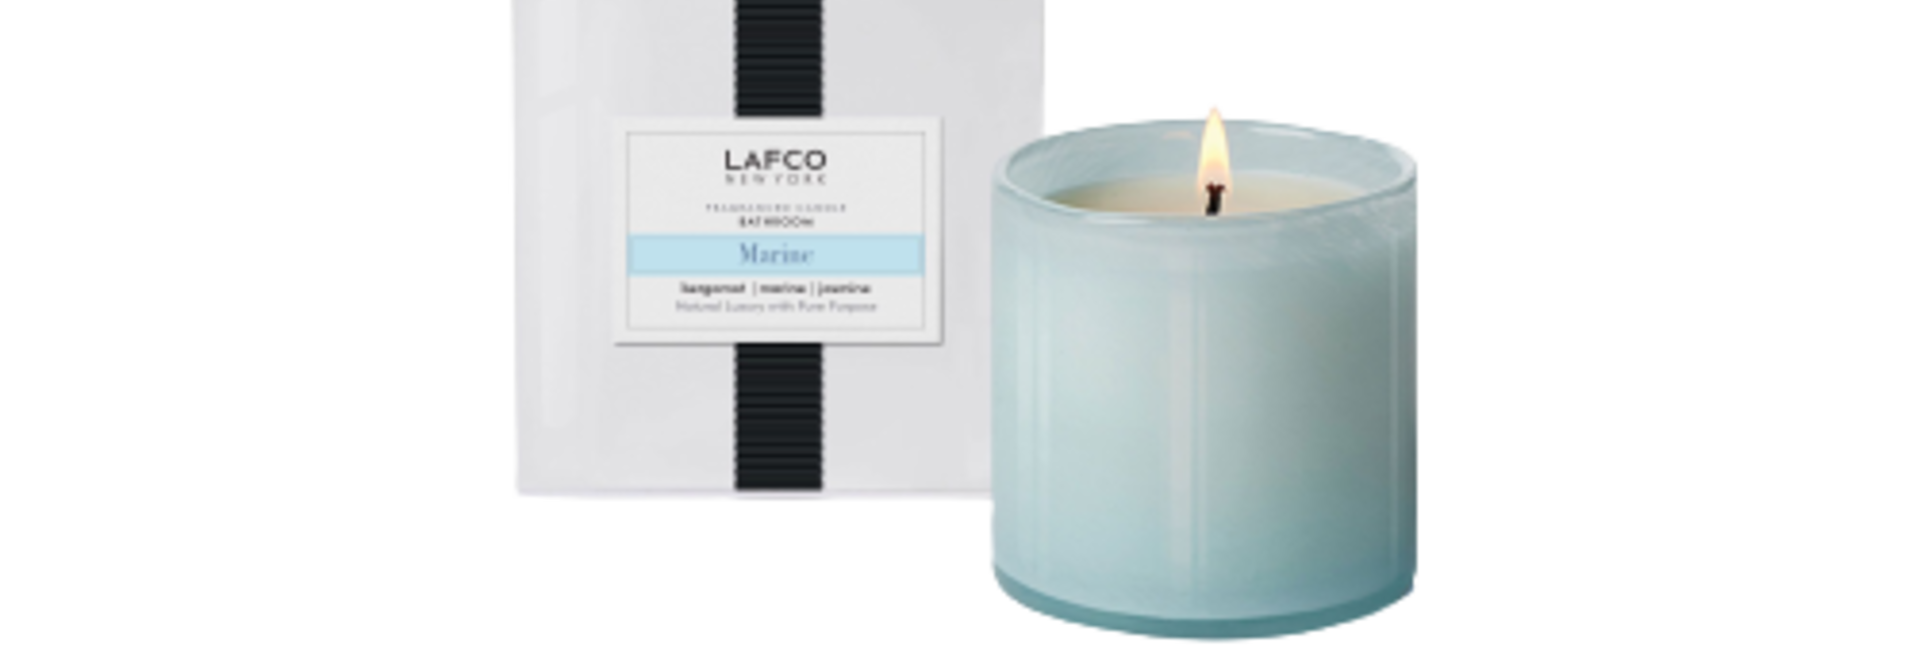 Marine l The Signature Candle Collection - 15 Oz